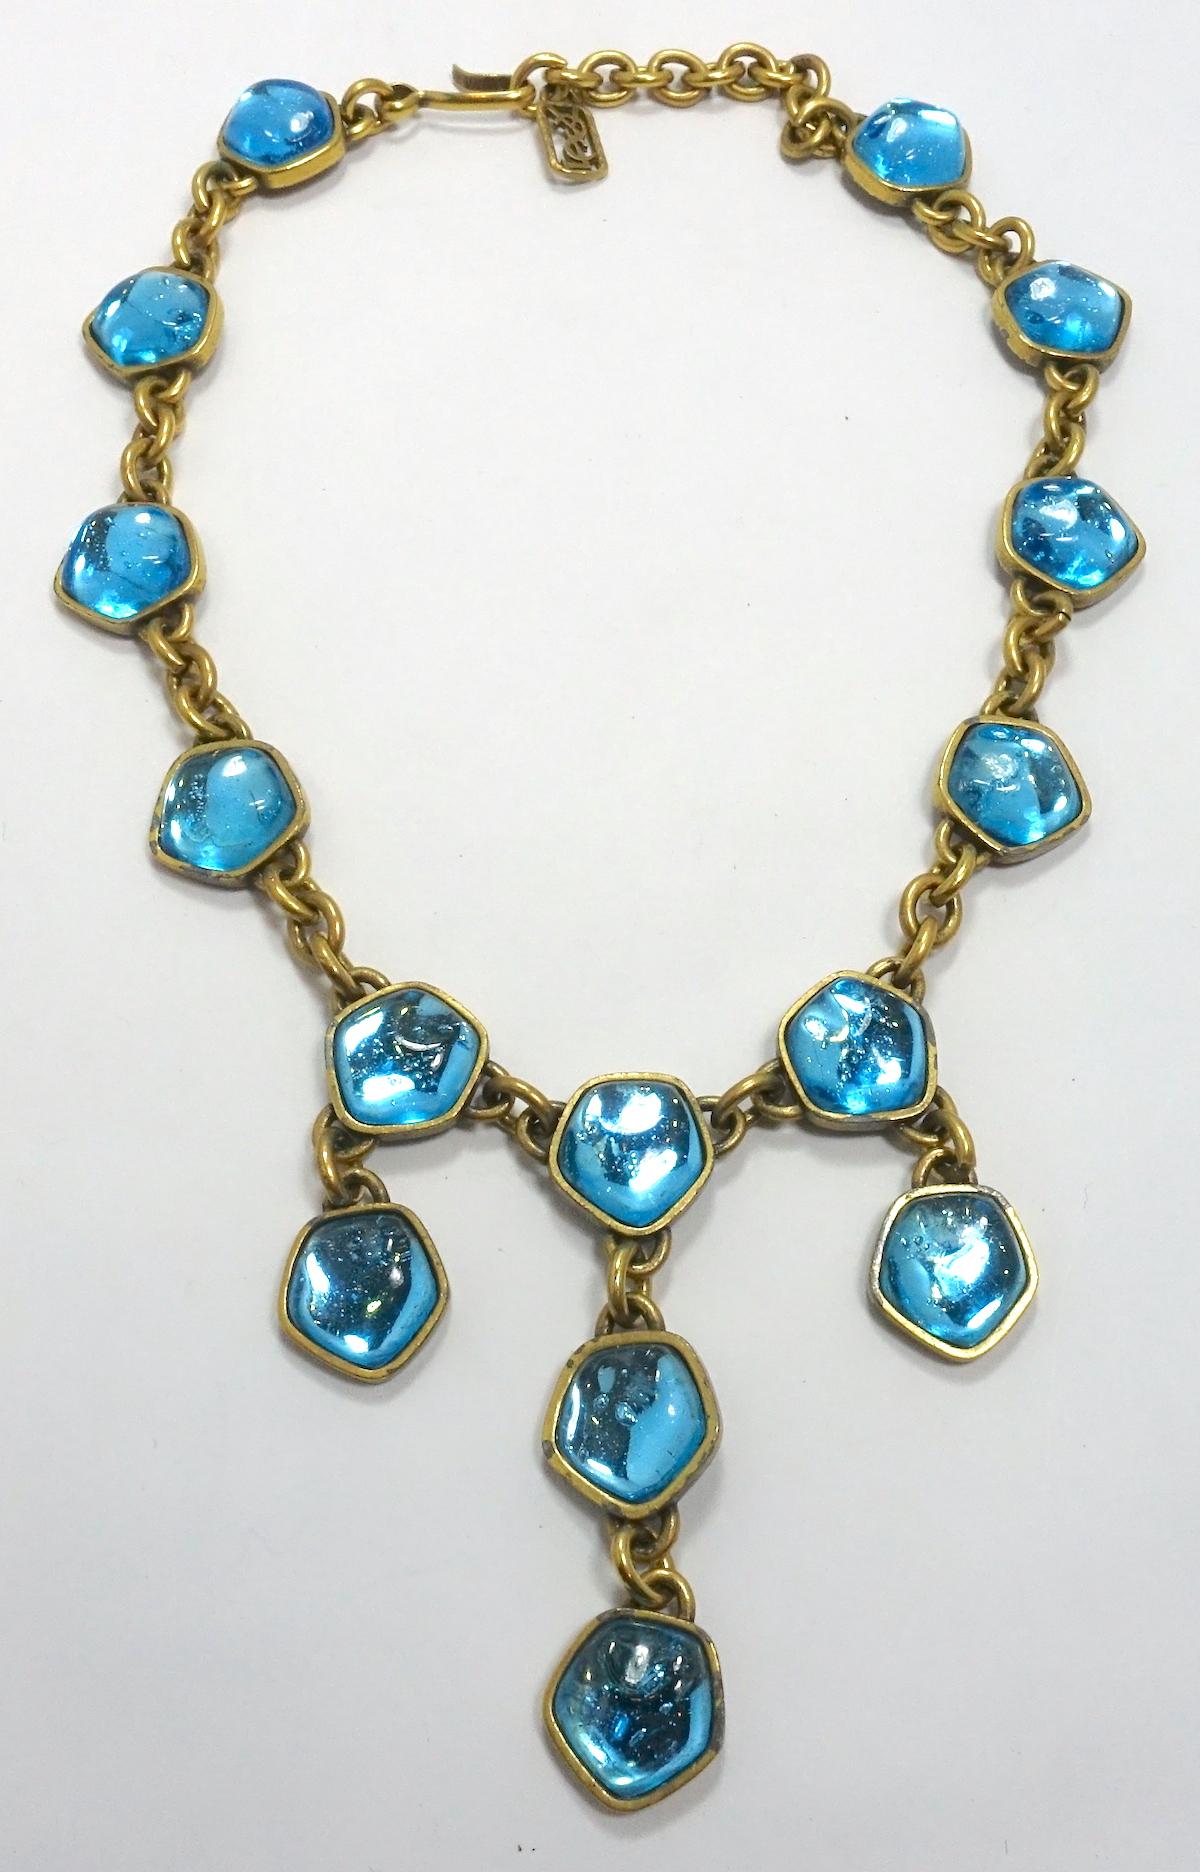 This vintage signed Yves St. Laurent necklace came from a top collection. It is designed with aqua blue poured glass in a gold tone setting.  The necklace measures 17-1/2” x 3/4” with the center drop 3” long (top to bottom).  It is signed “YSL” and